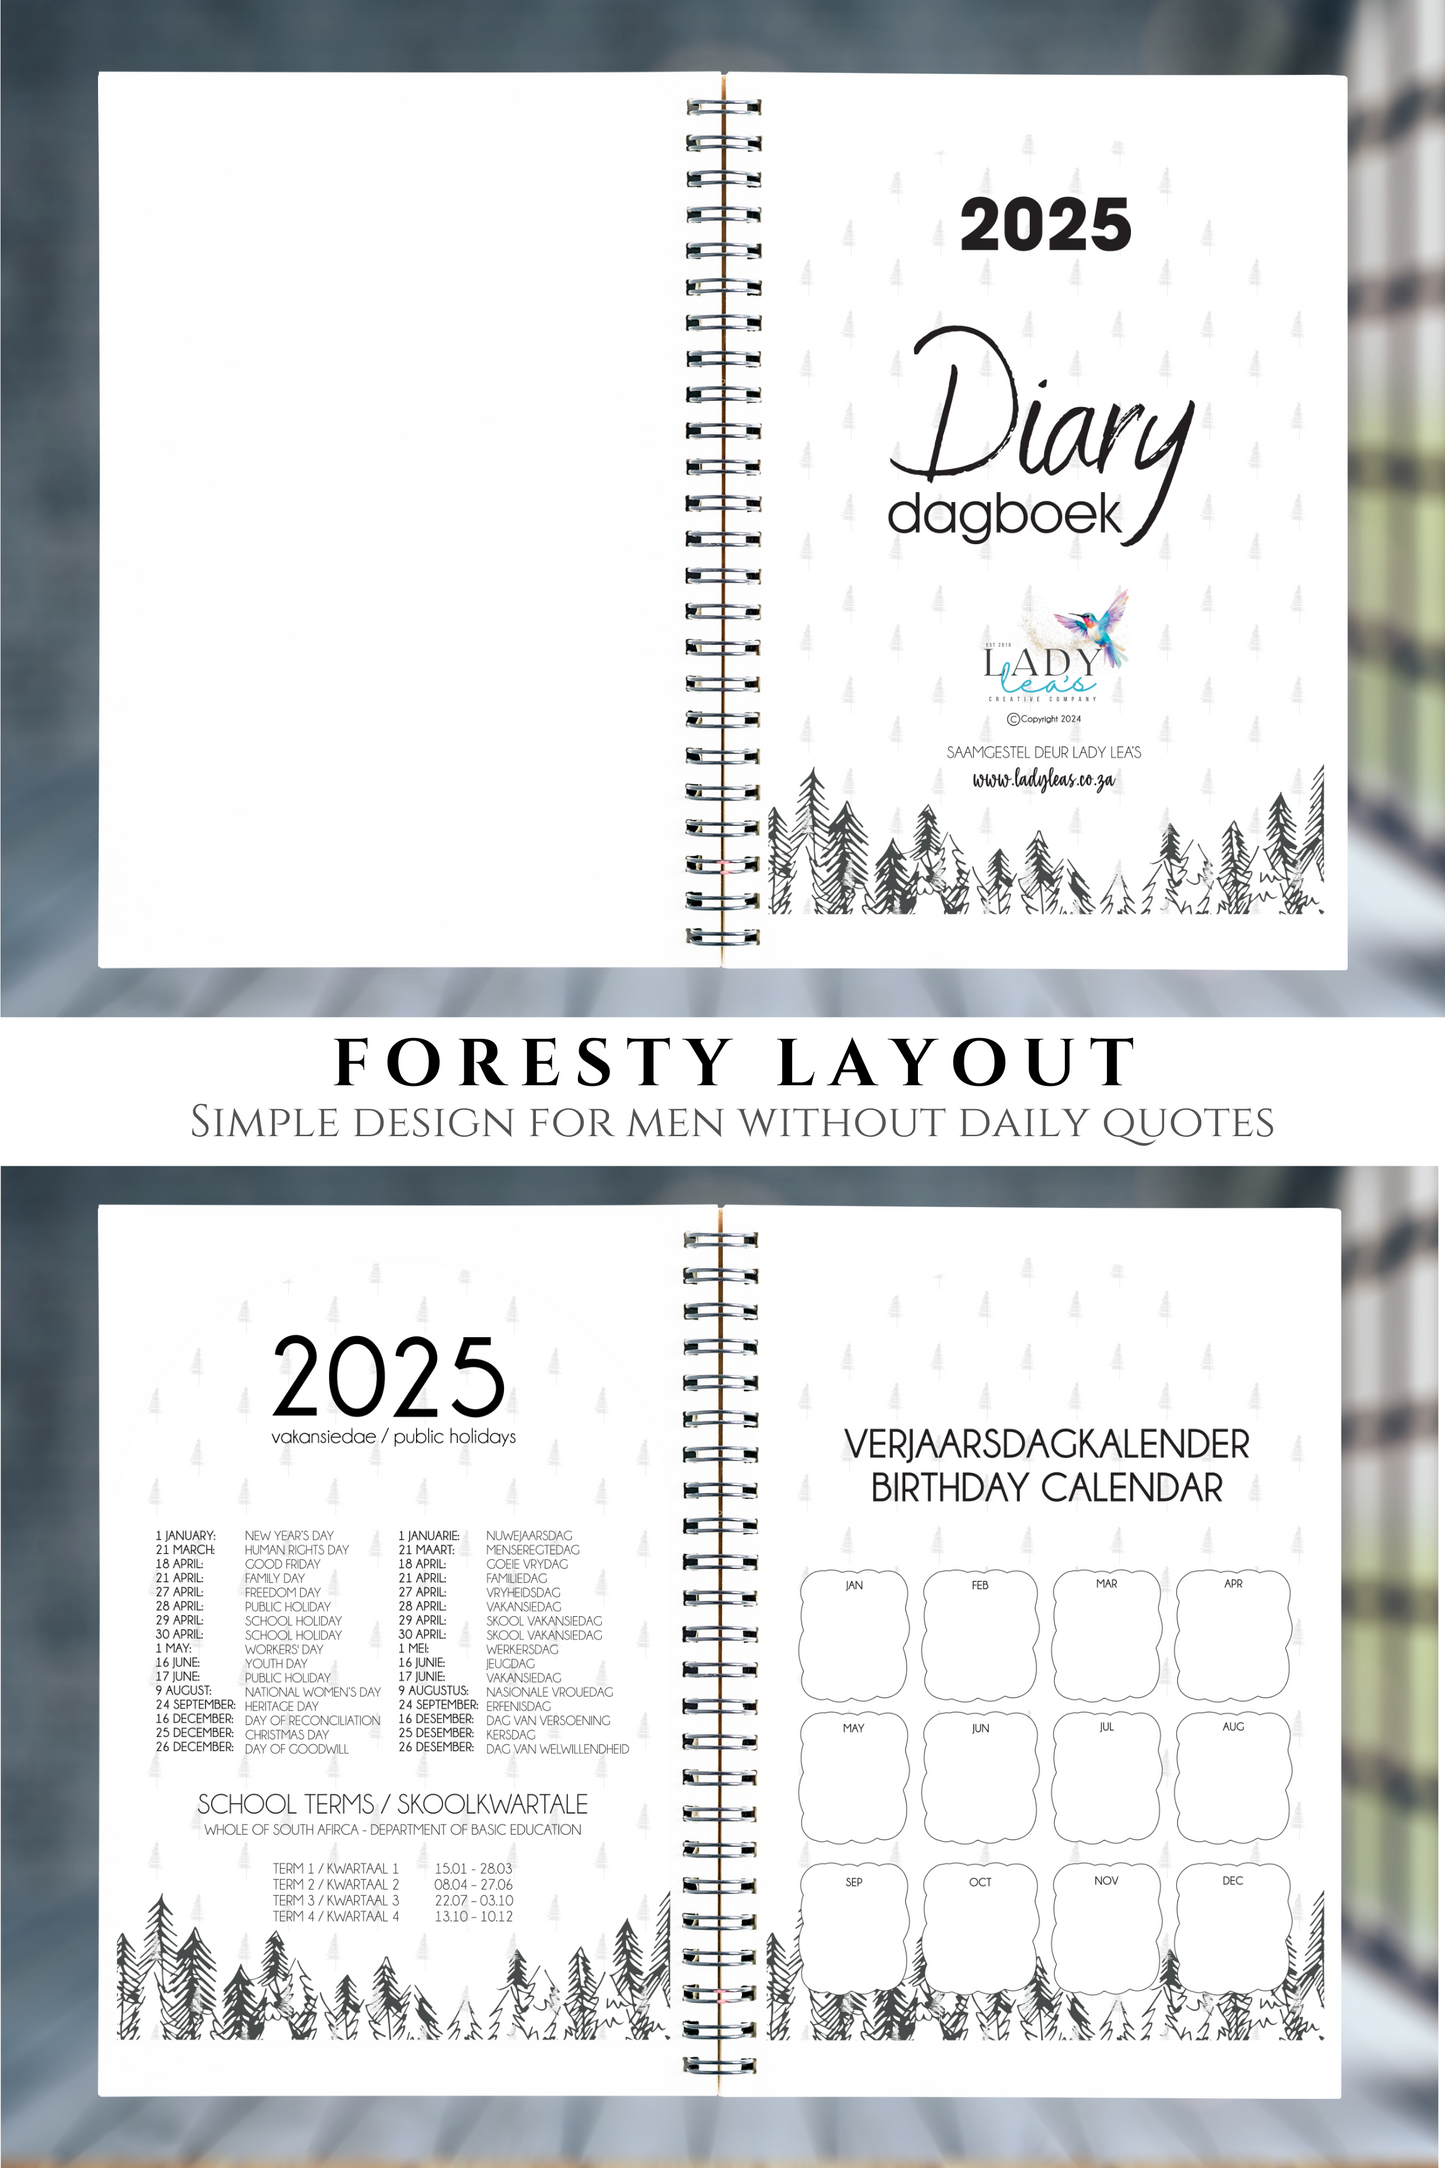 FINE FLORAL DIARY 2025